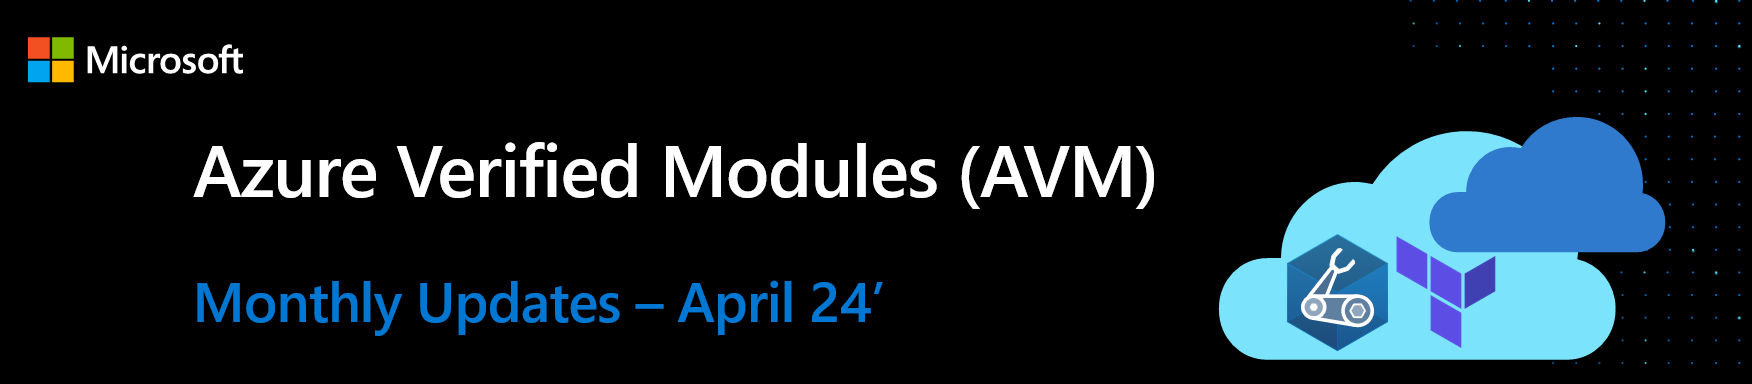 Azure Verified Modules - Monthly Update [April]